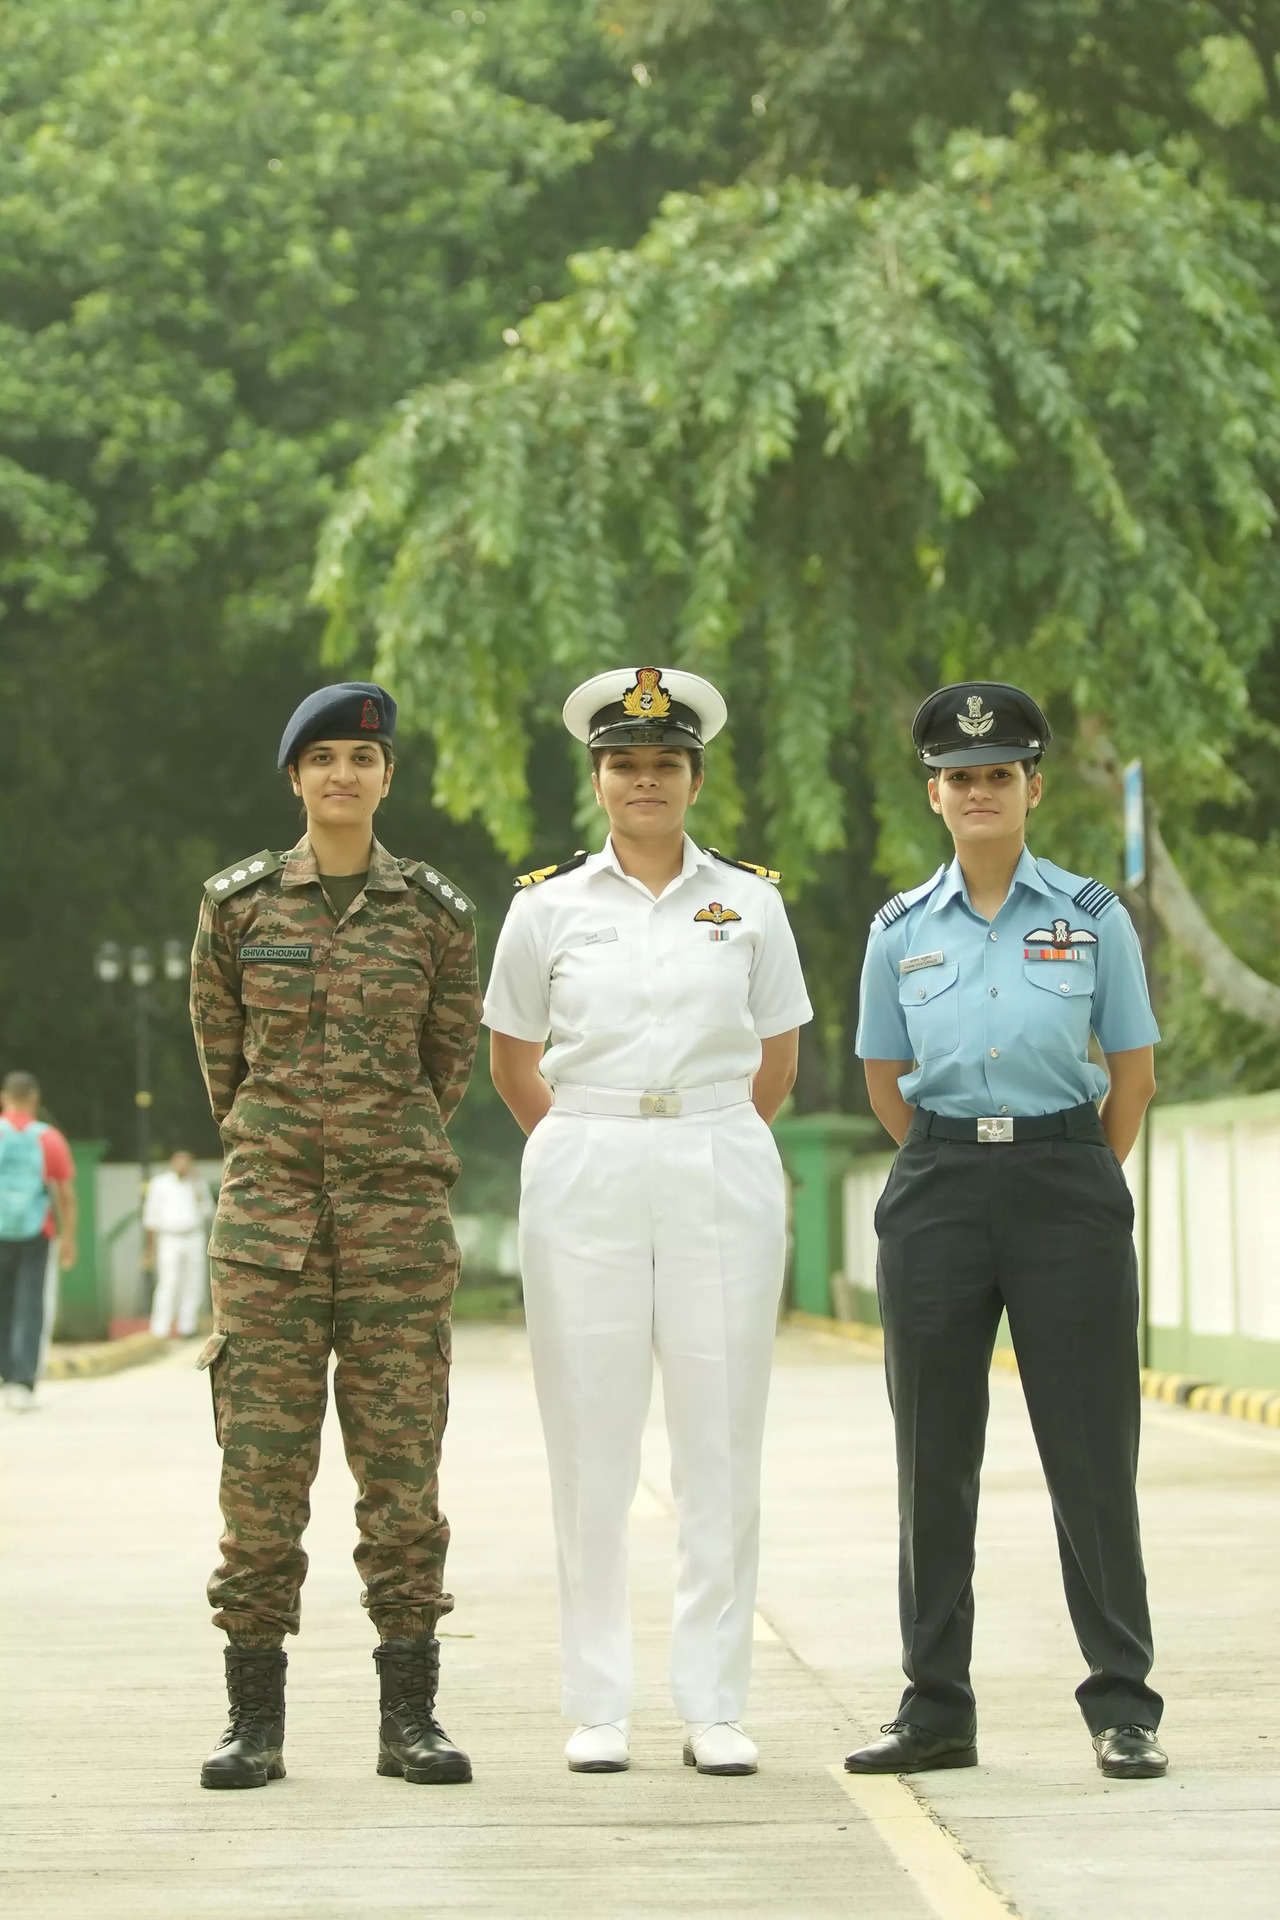 Dare to dream: Women in uniform urge youngsters - Times of India